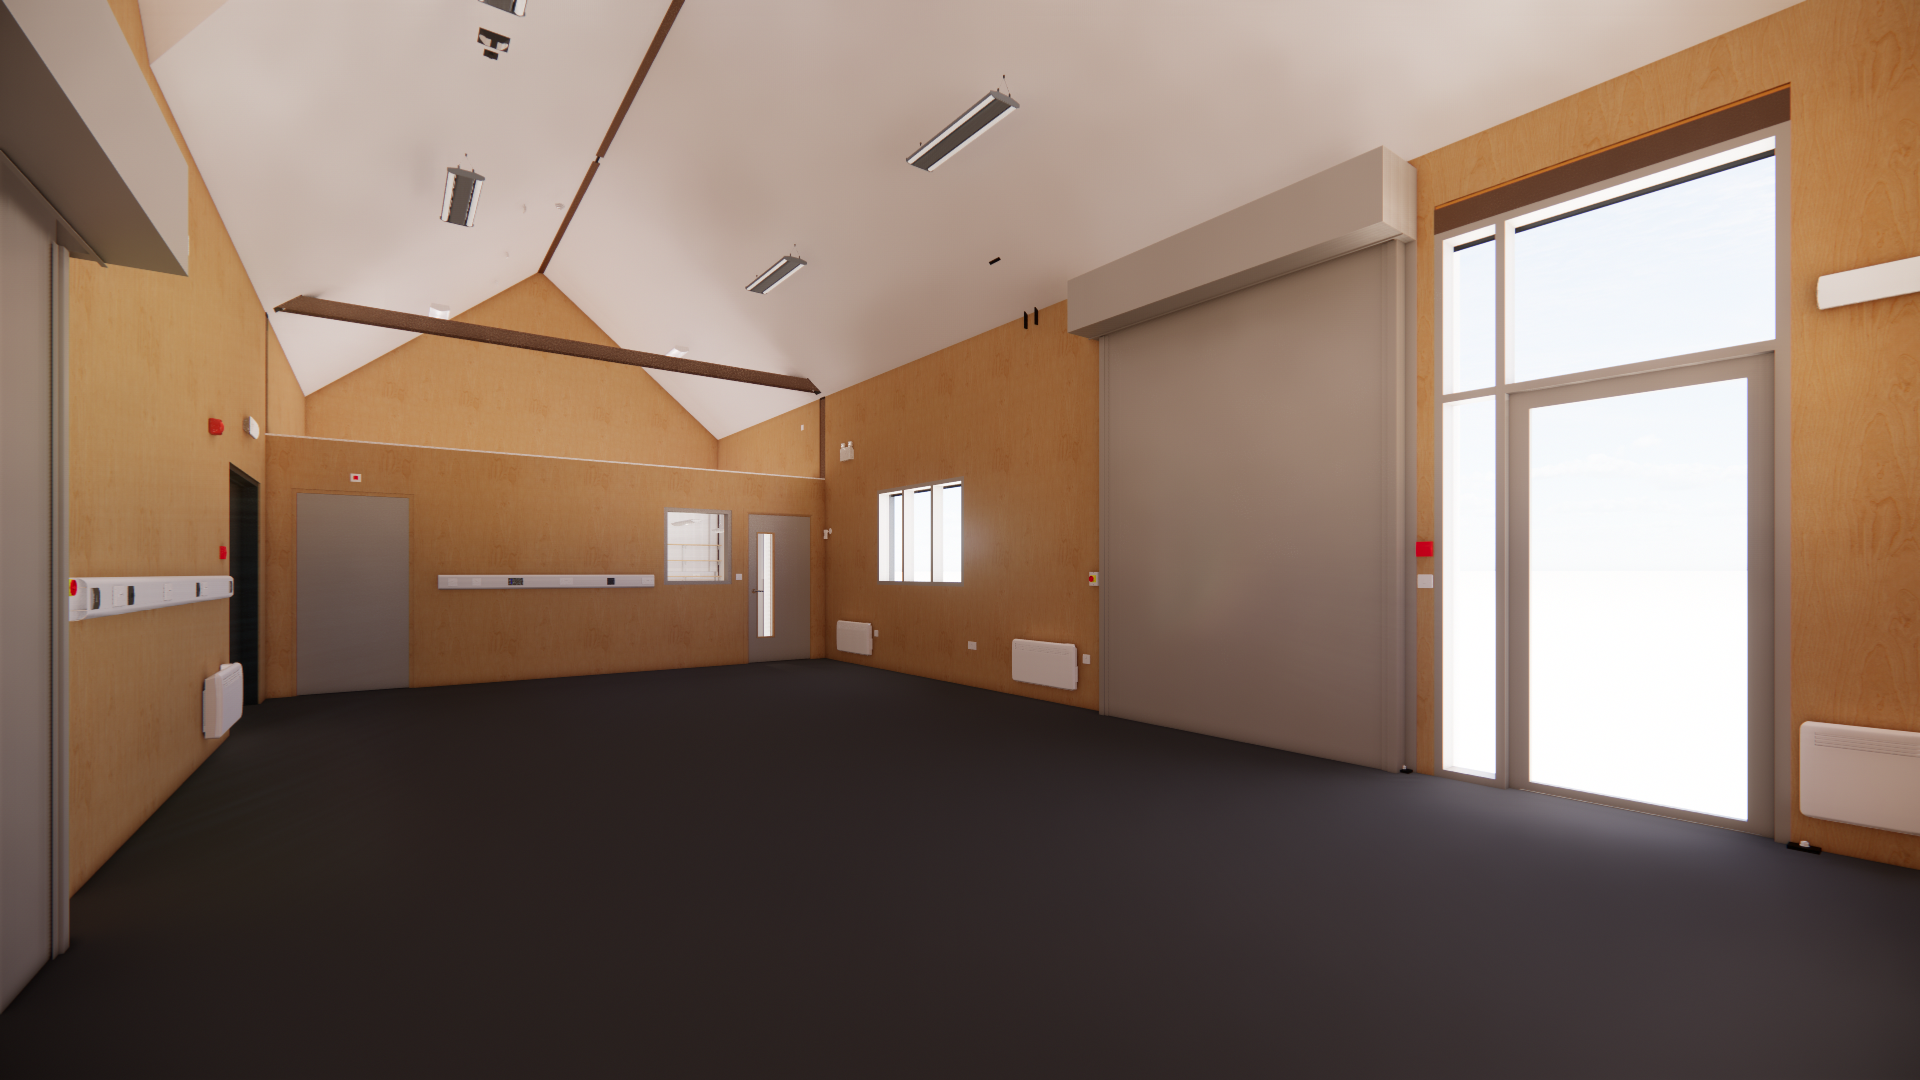 An artist impression of the activity room towards the office